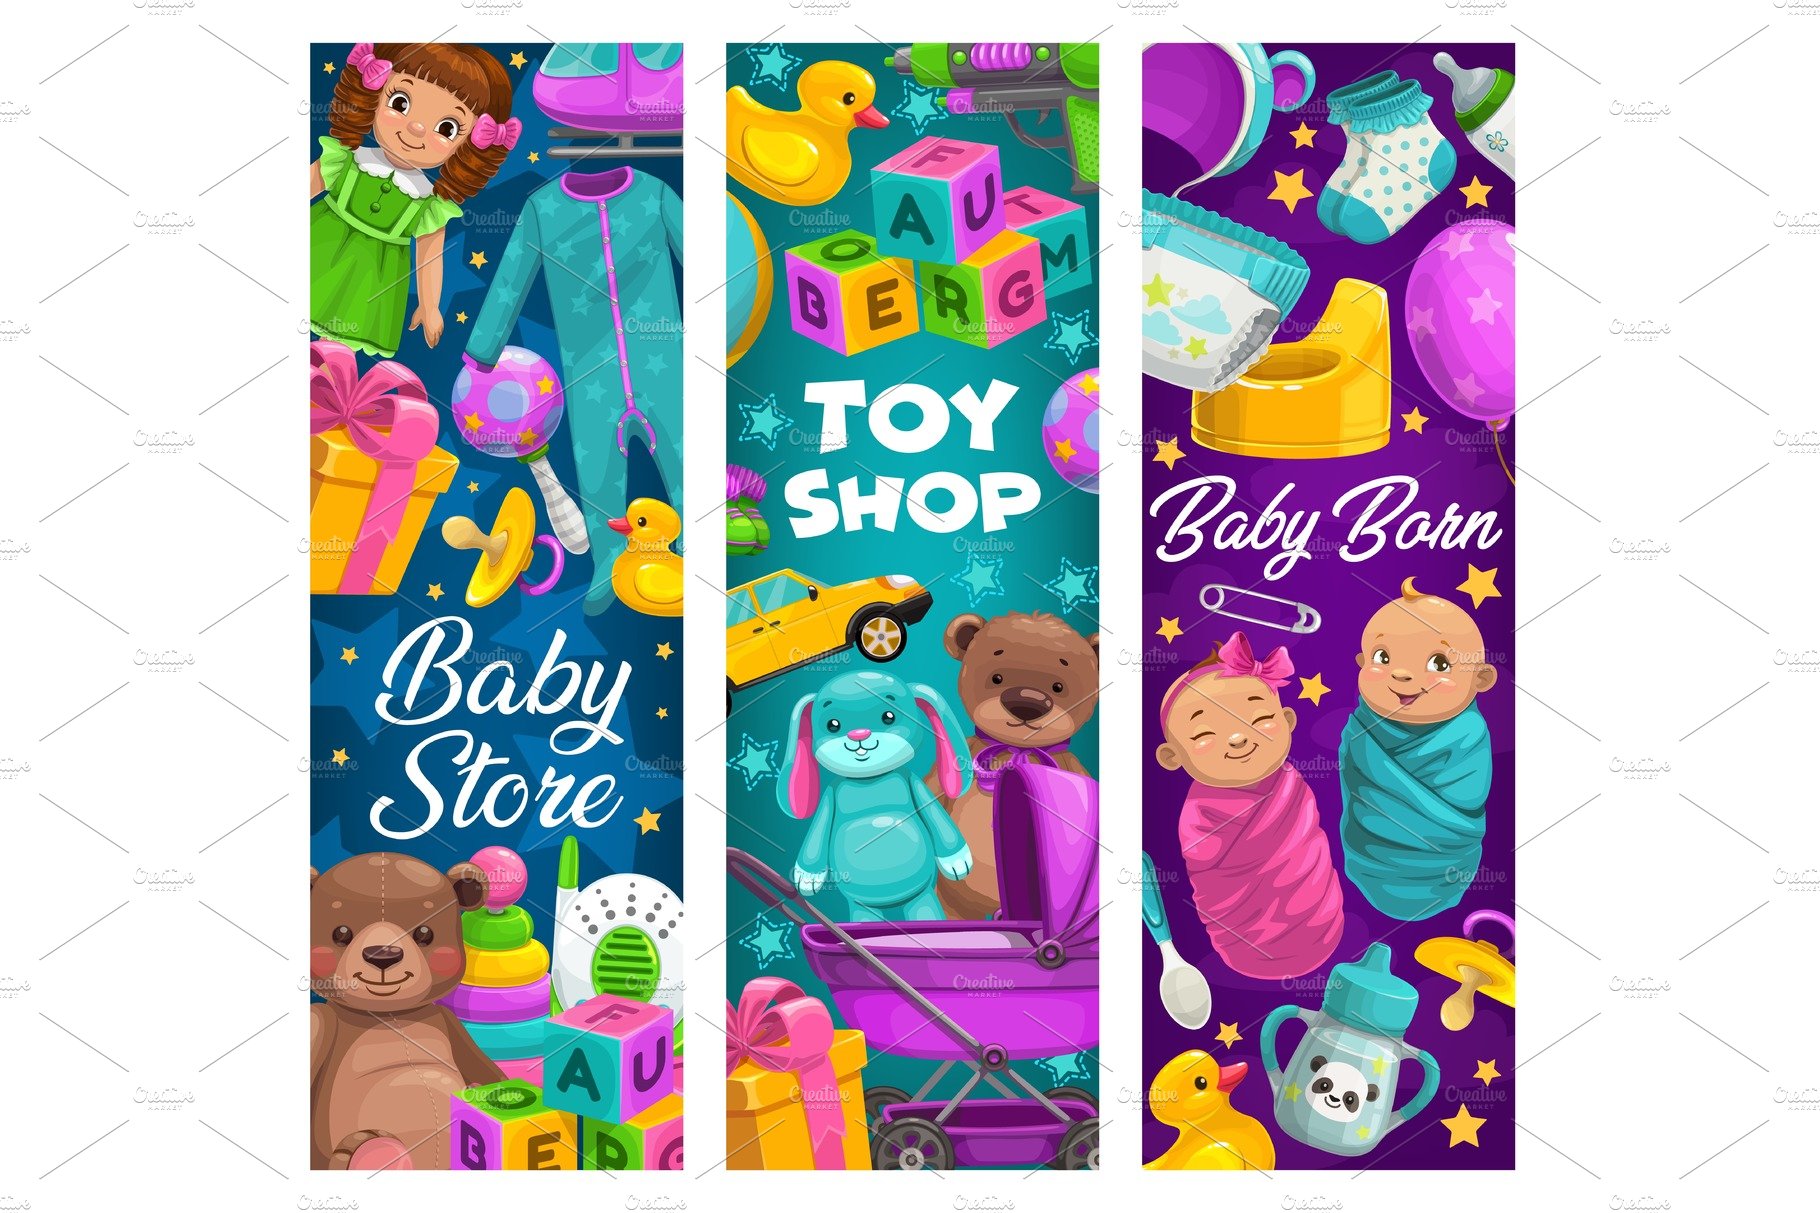 Baby care, toys shop cover image.